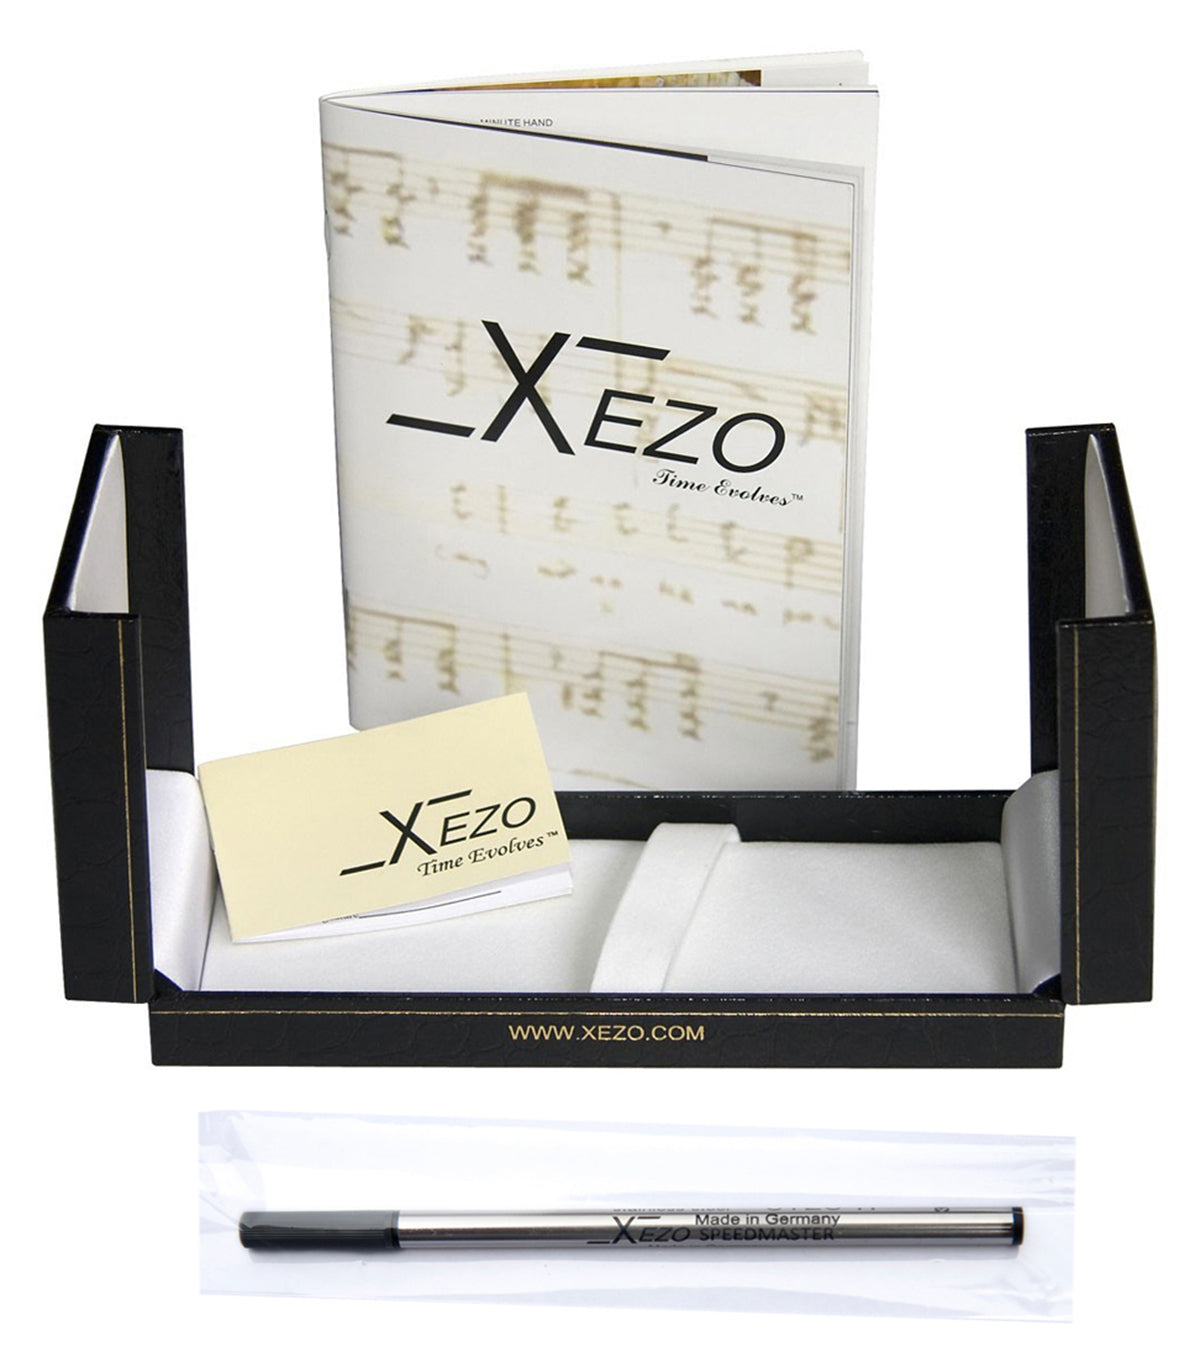 Xezo - Black gift box, certificate, manual, and gel ink cartridge of the Maestro 925 BL MOP R rollerball pen